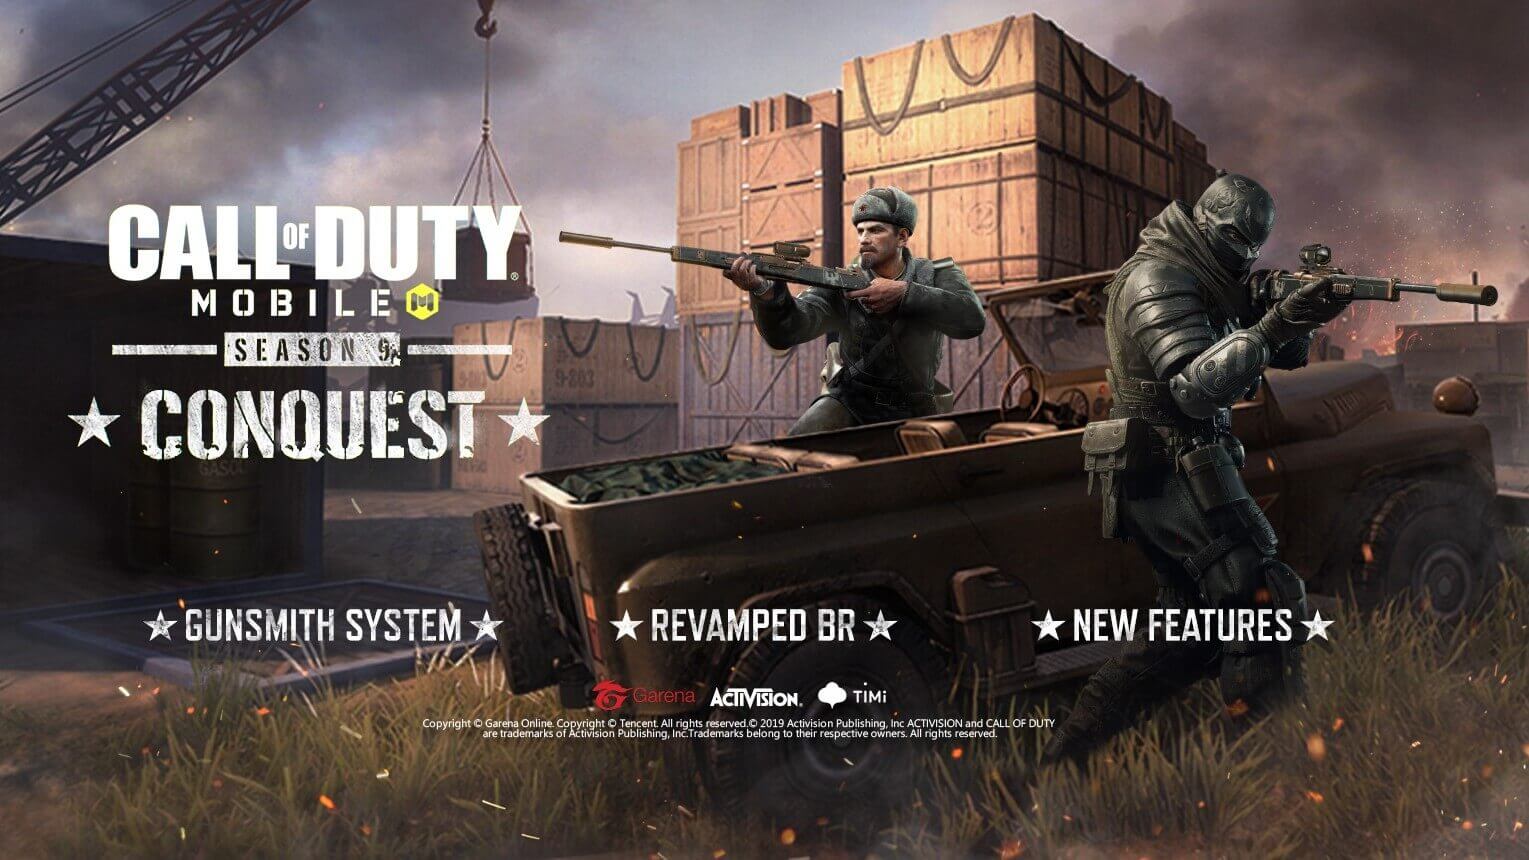 Call of Duty: Mobile Mod Apk 1.0.37 Download